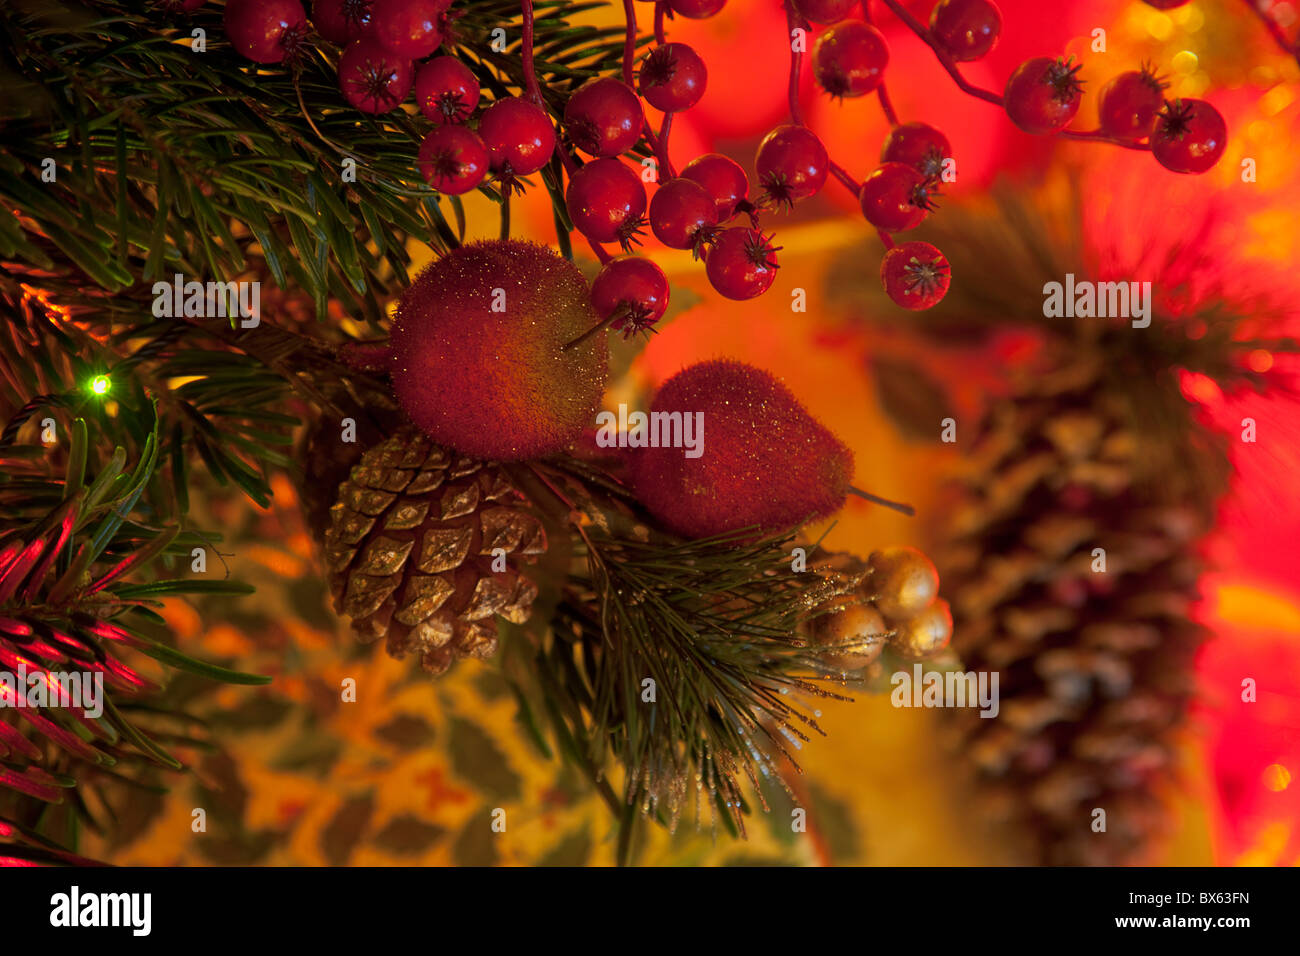 Festivals Religious, Christmas, Detail of lights and decorations on Nordman Fir tree. Stock Photo